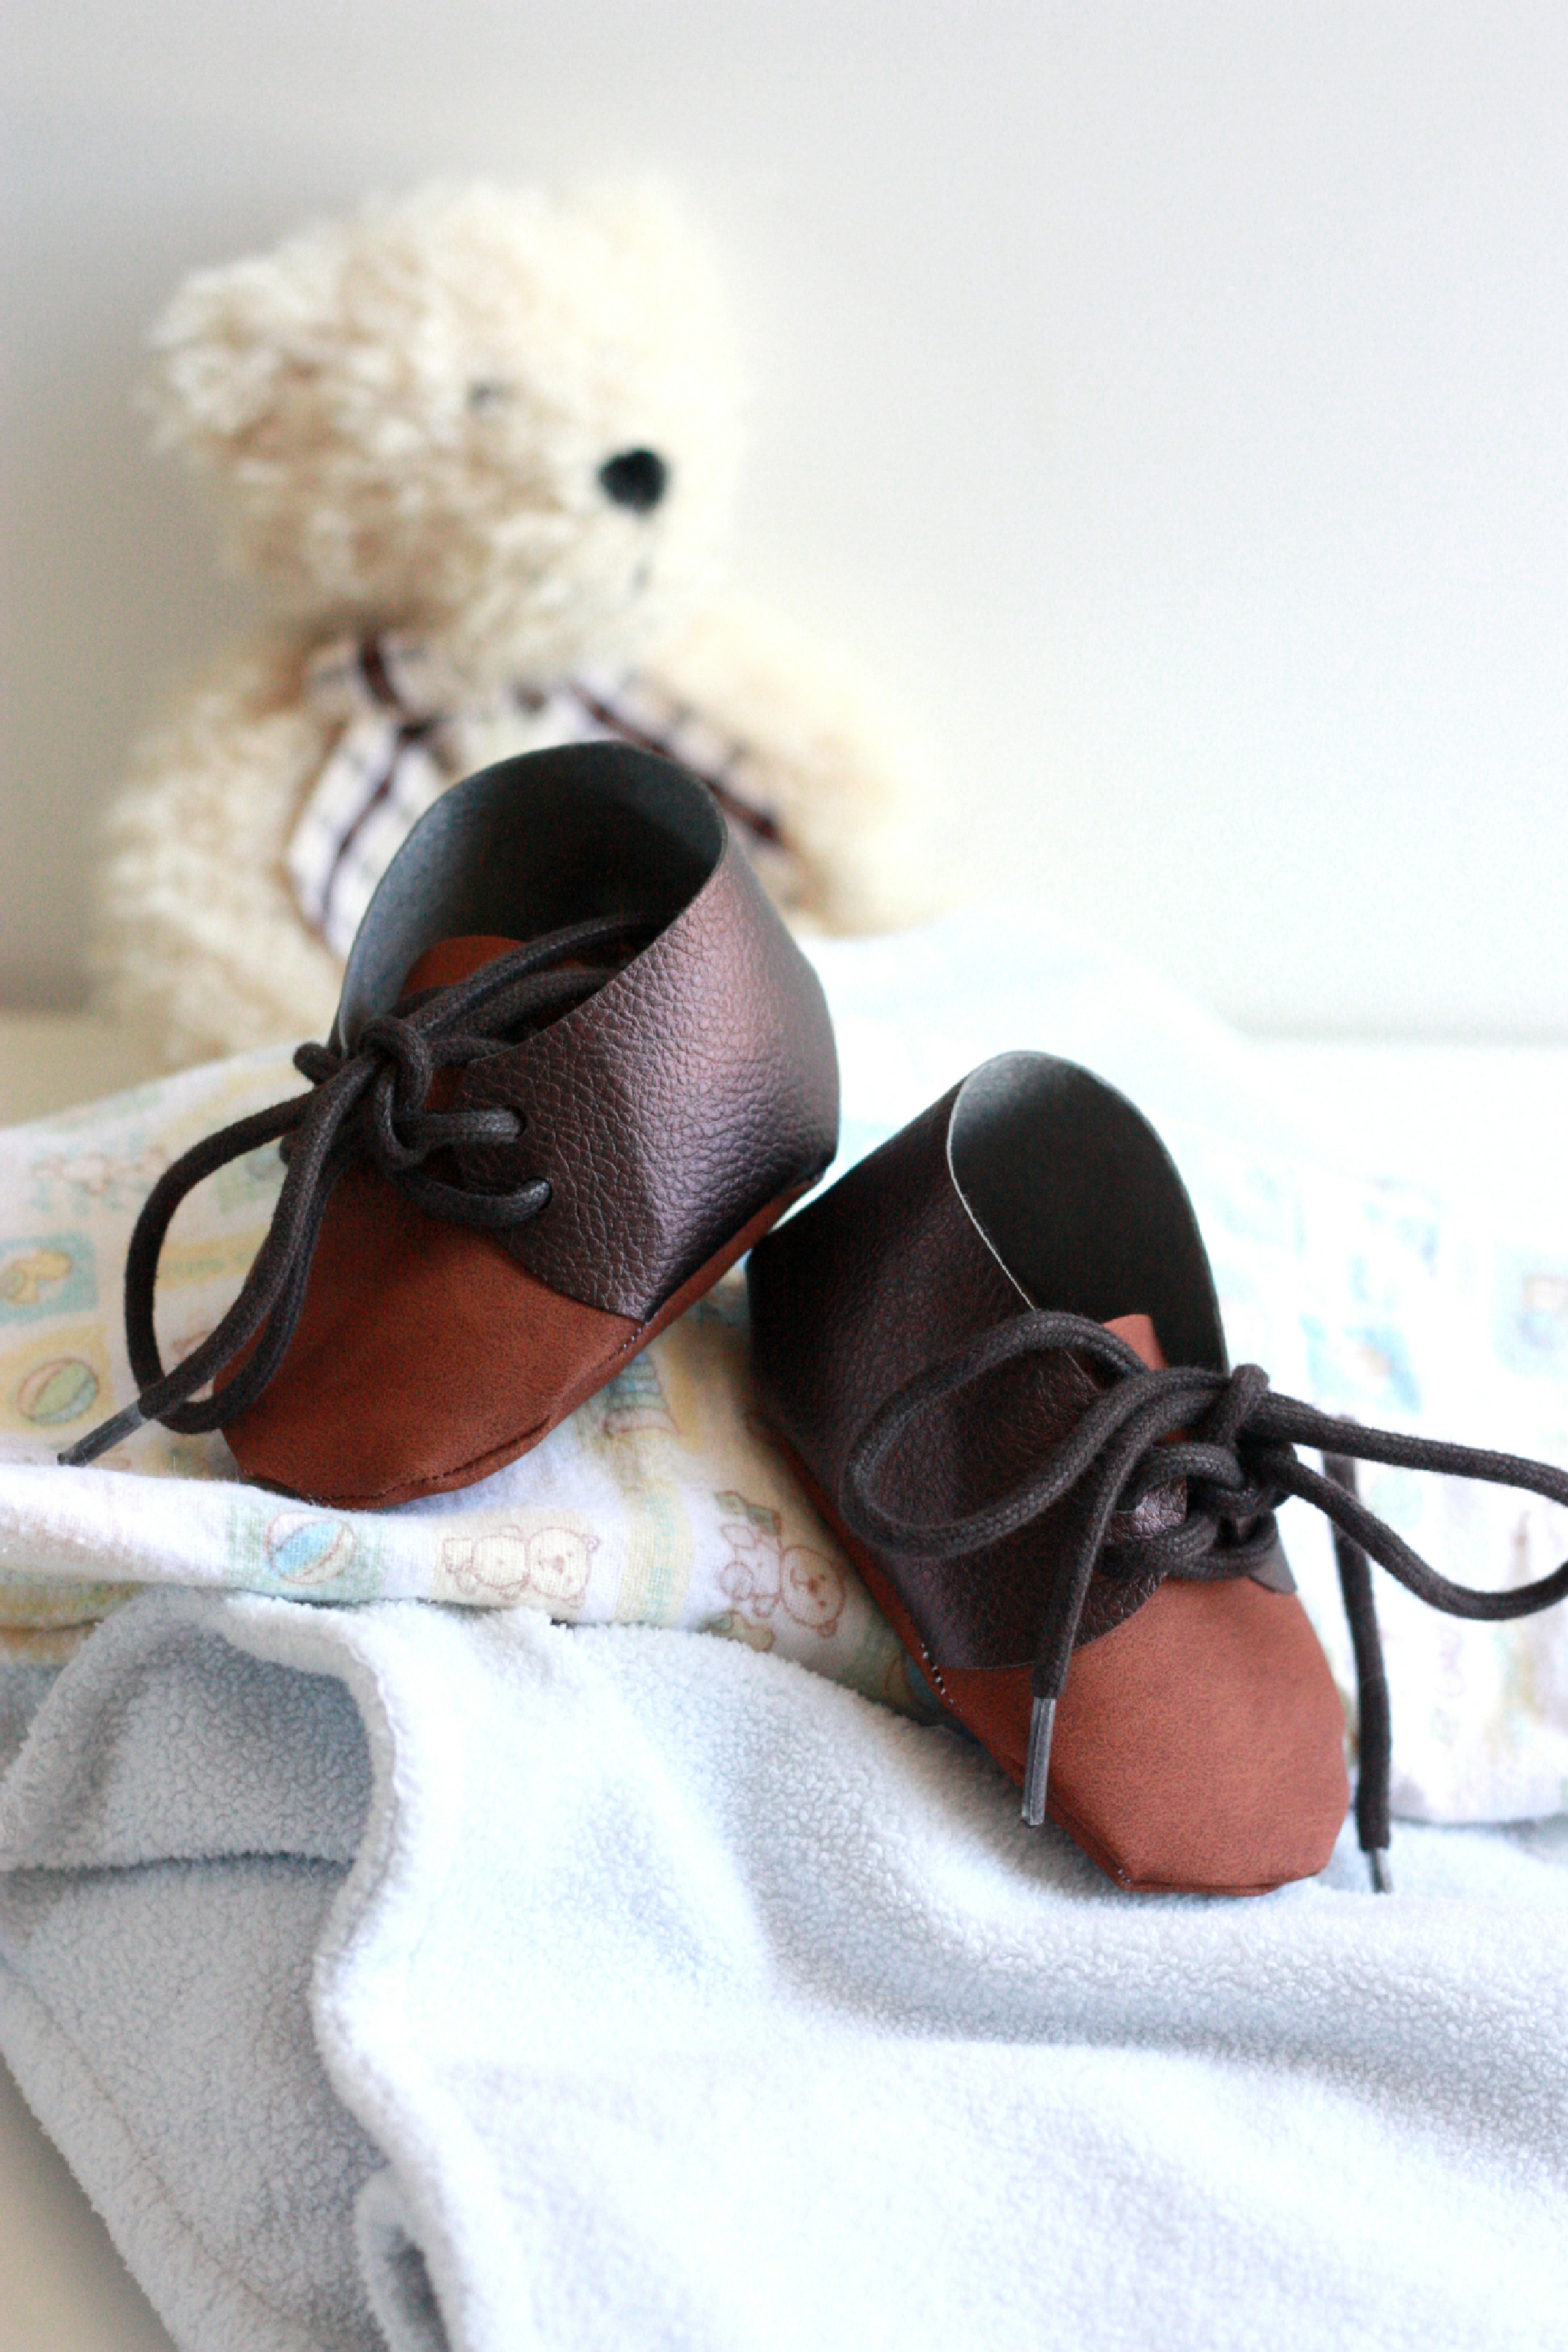 FAUX LEATHER BABY SHOES WITH CRICUT 